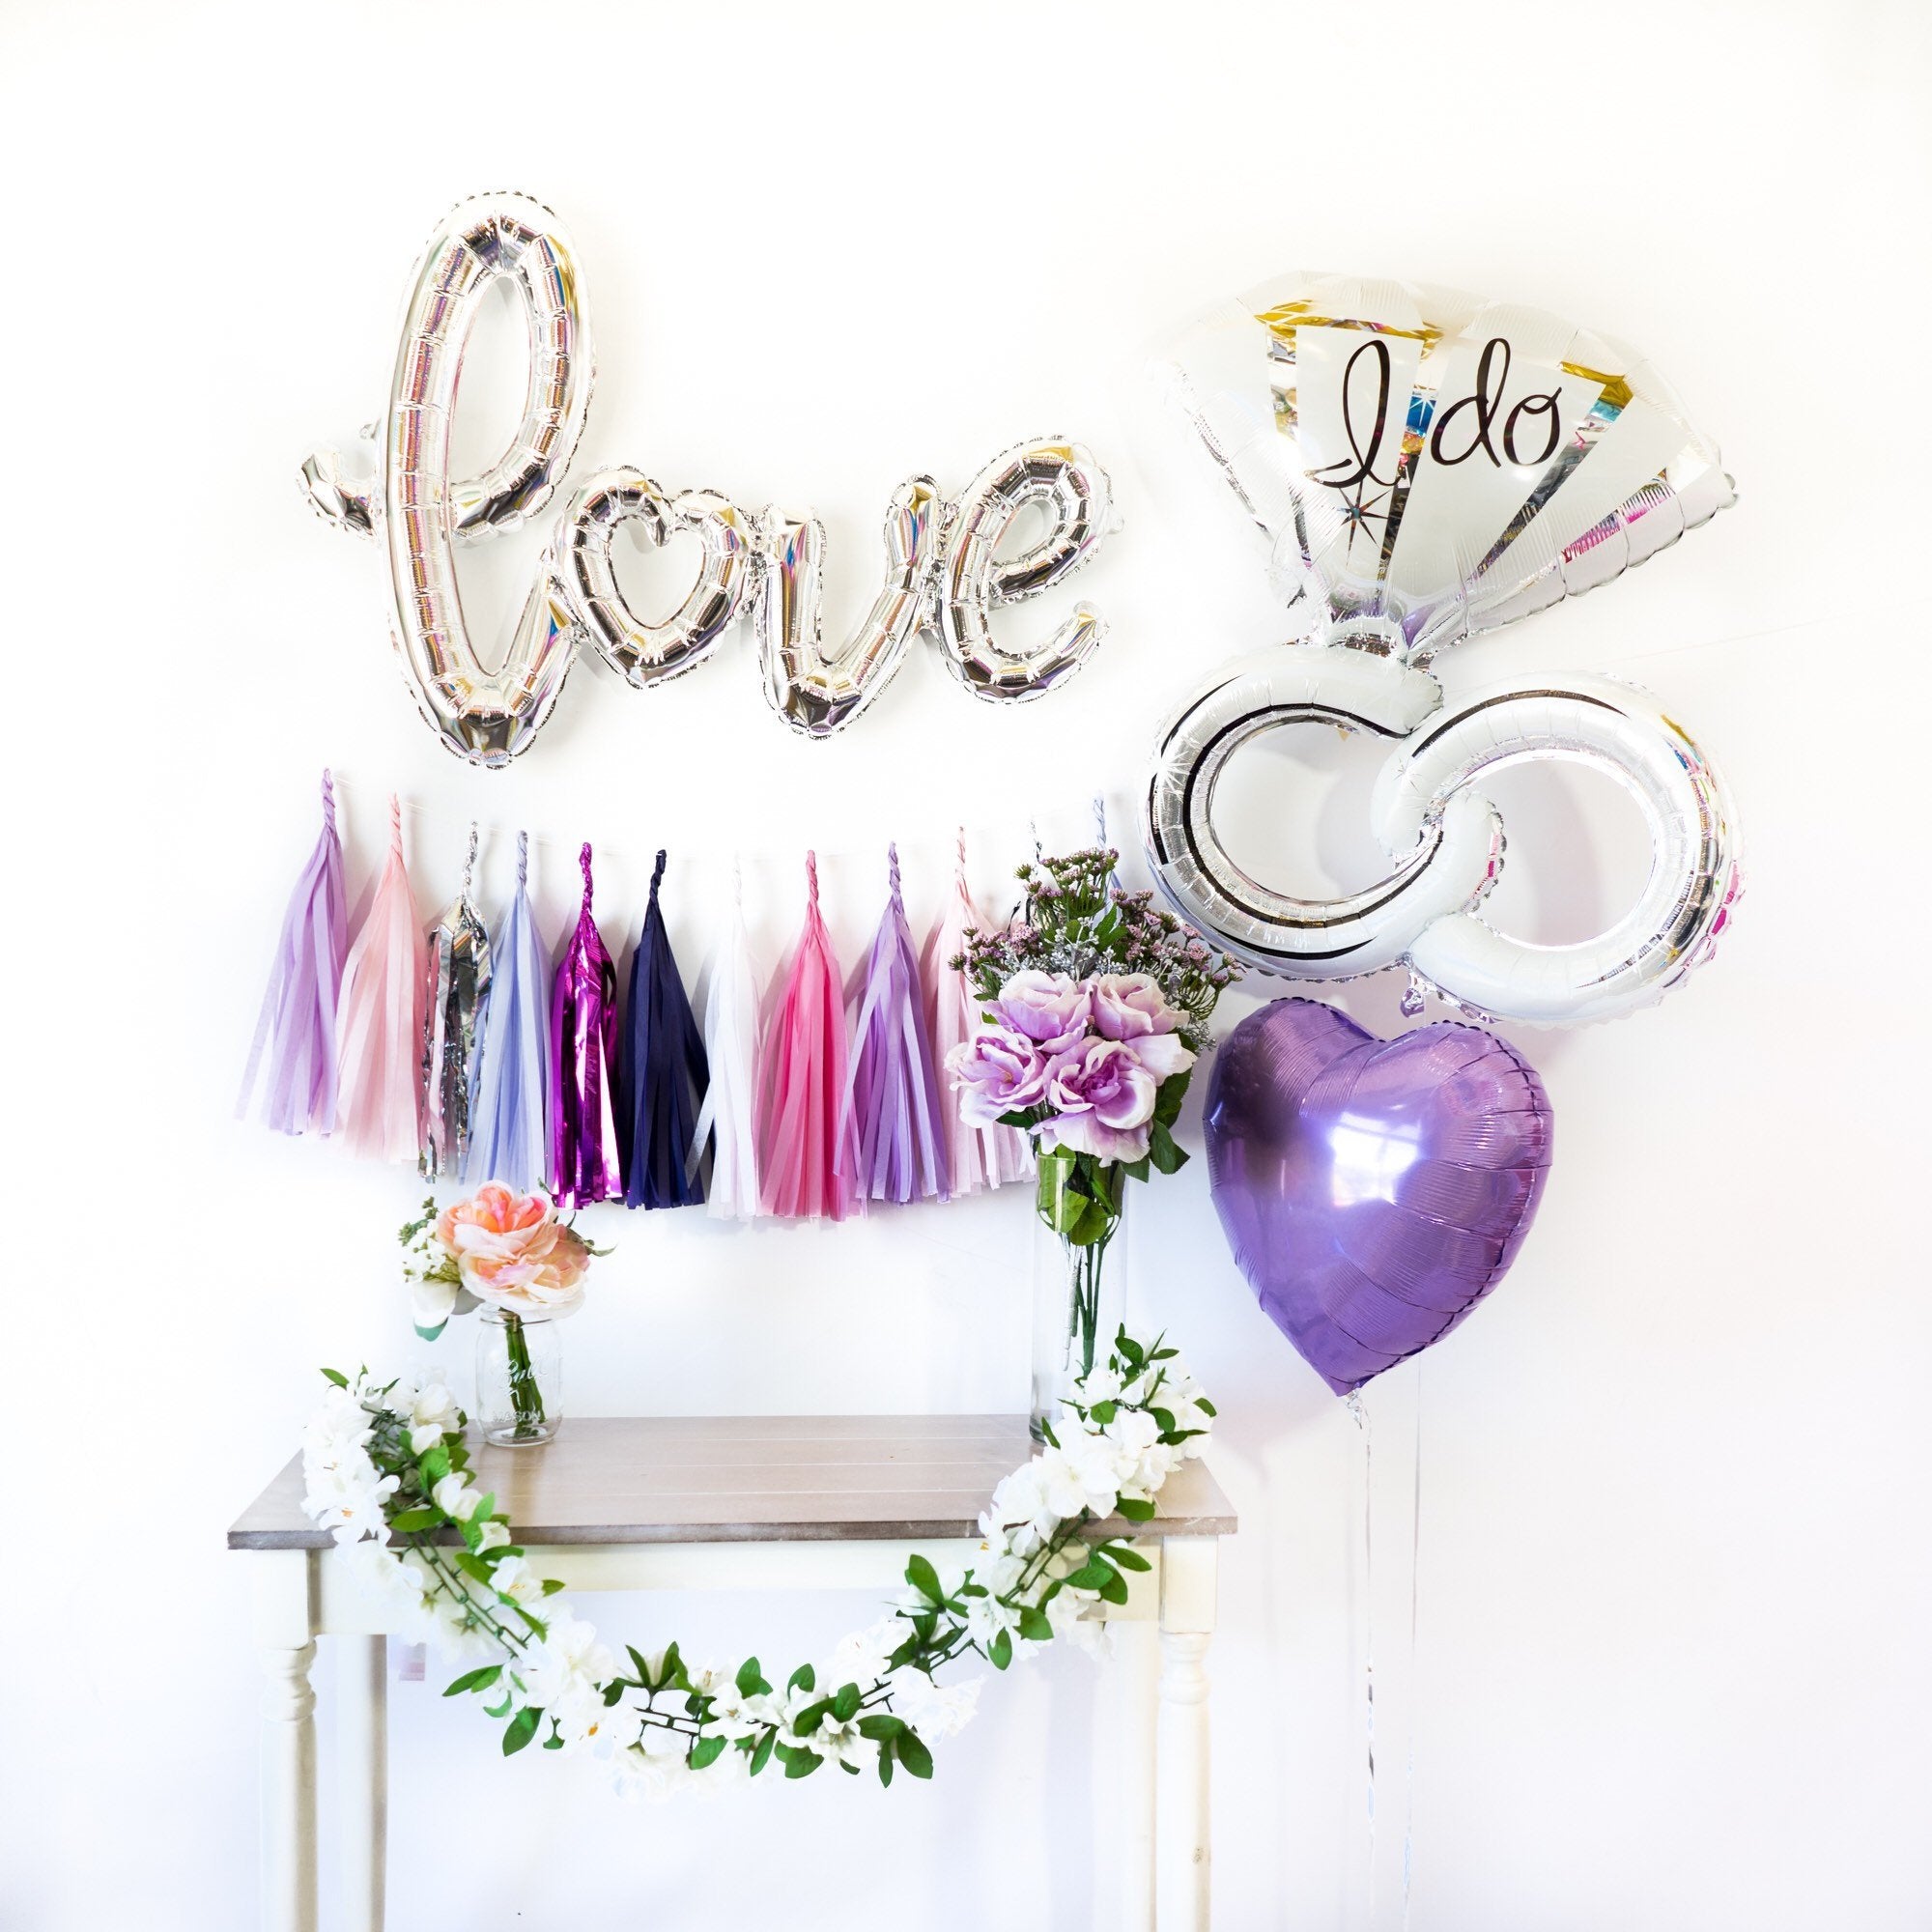 Bride To Be Rose gold balloons silver letters bride banner garland bridal  ring